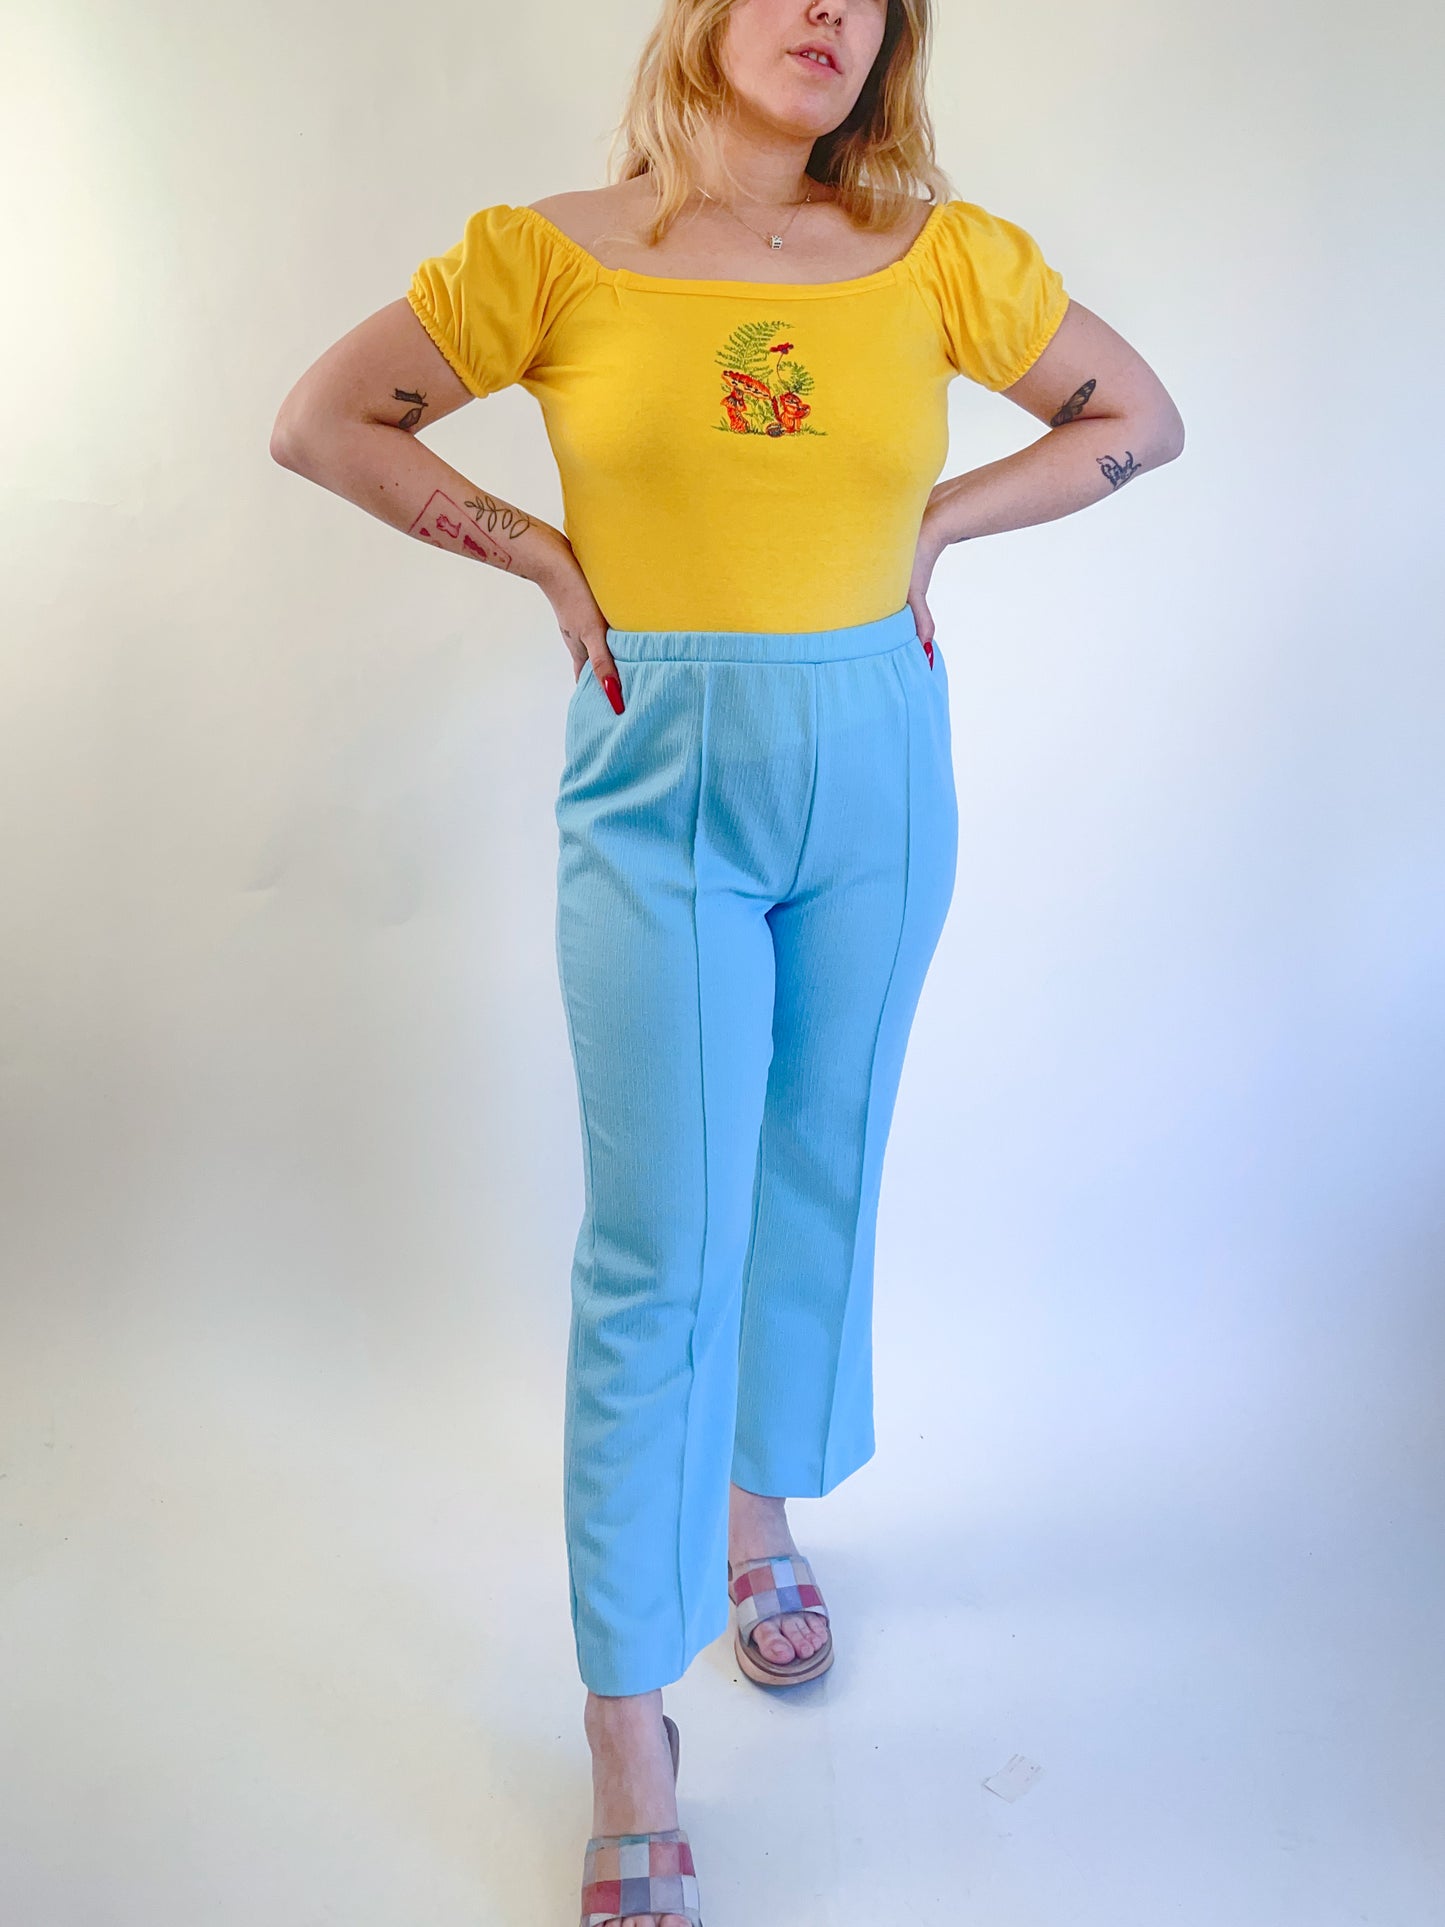 70s Baby Blue Polyester Kick Flare Pants (M)